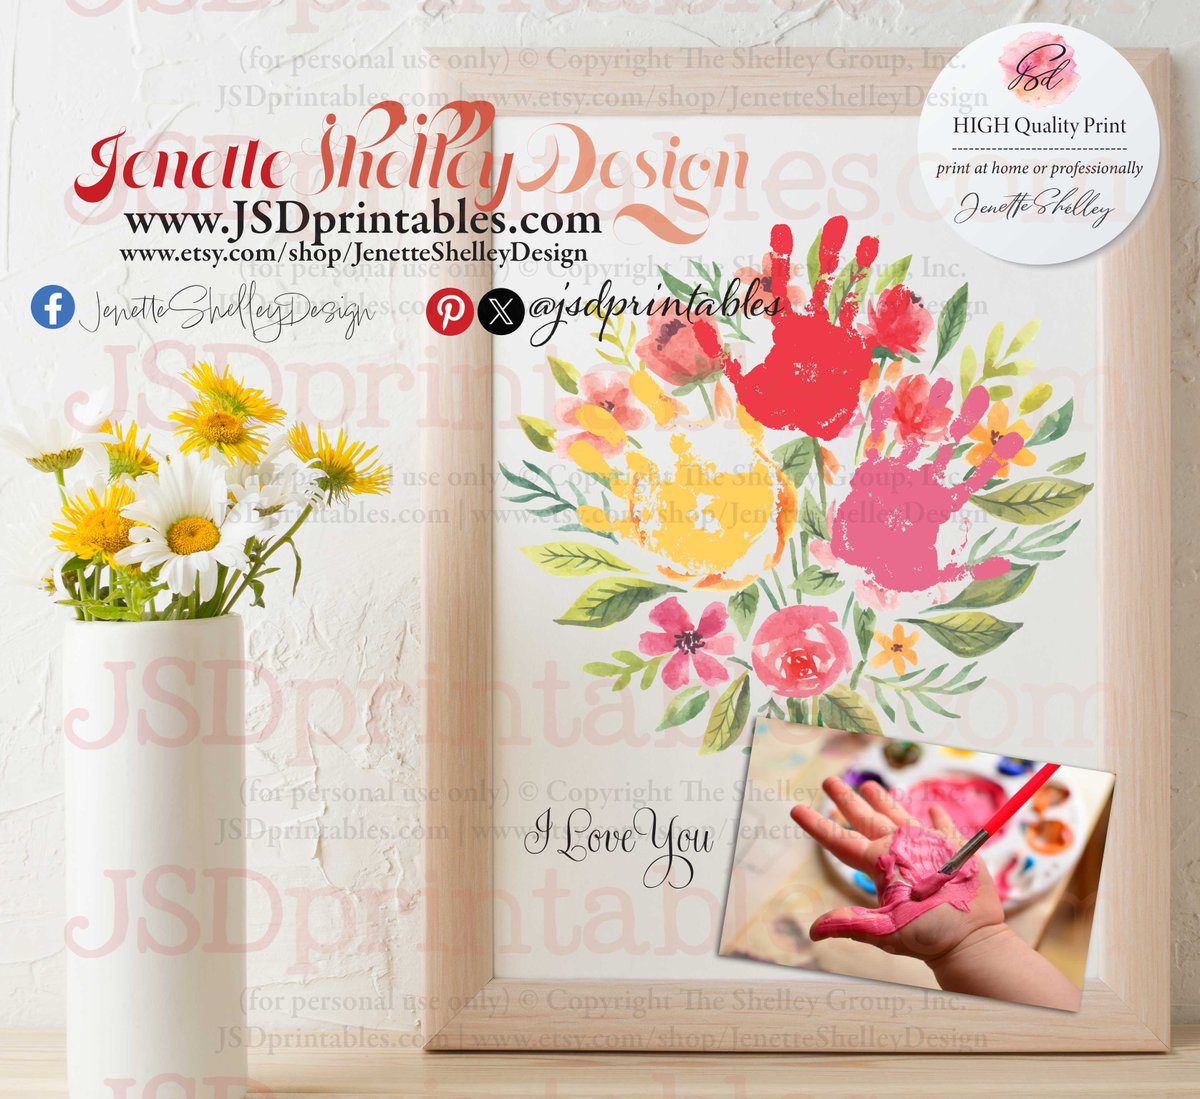 Our Bouquet of Flowers Handprint Keepsake Digital Print is the perfect gift for a special occasion like a mother's day or birthday. jsdprintables.com/product-page/b… @jsdprintables #shopsmall #smallbusiness #digitalprints #handprints #craftsforkids